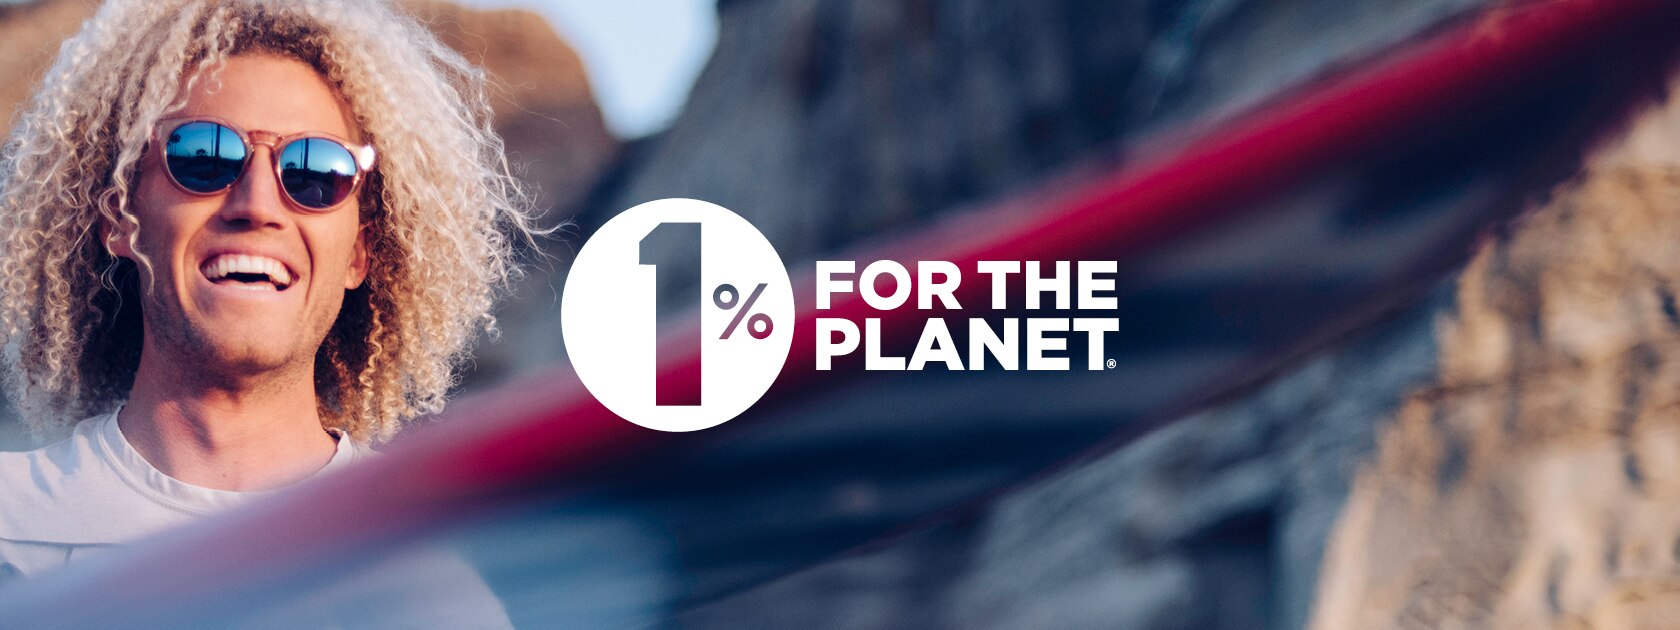 a smiling man wearing sunglasses and holding a surfboard with 1% for the Planet logo in the middle